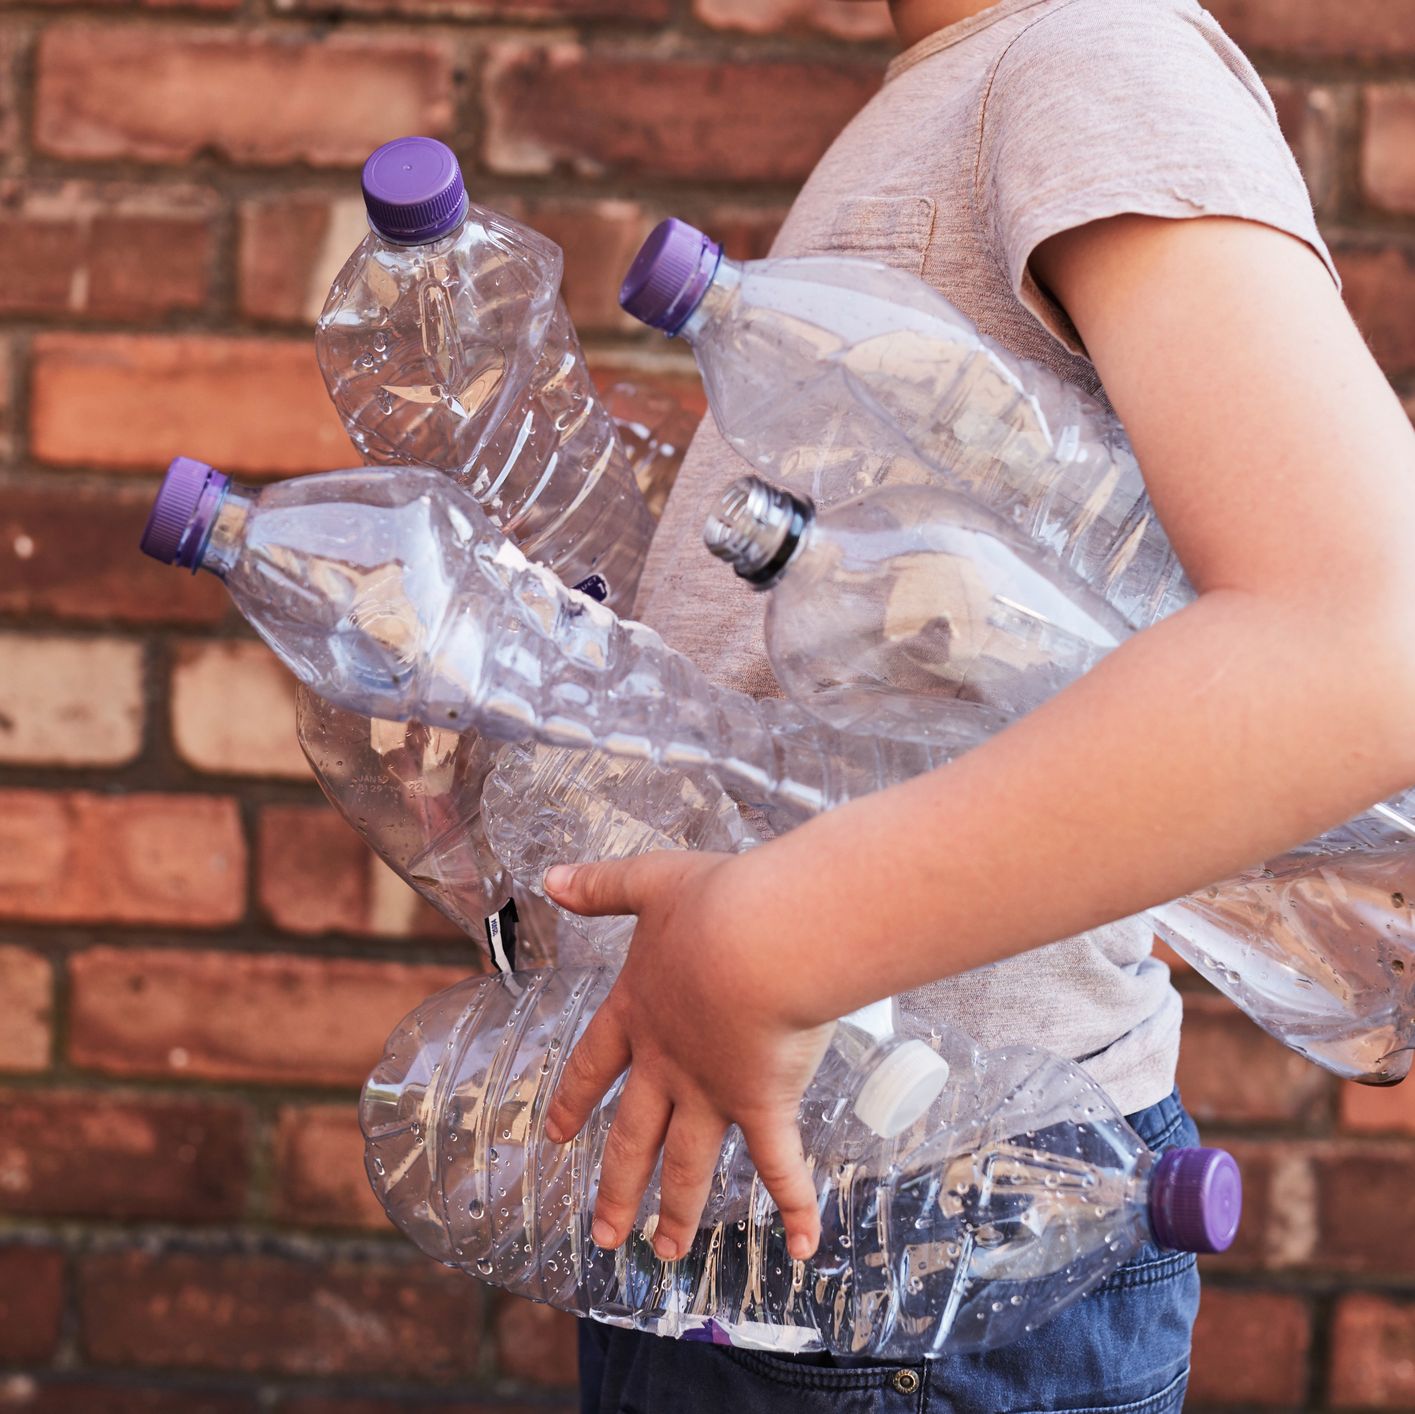 https://hips.hearstapps.com/hmg-prod/images/child-recycling-plastic-bottles-royalty-free-image-992204518-1553178242.jpg?crop=0.667xw:1.00xh;0.221xw,0&resize=2048:*